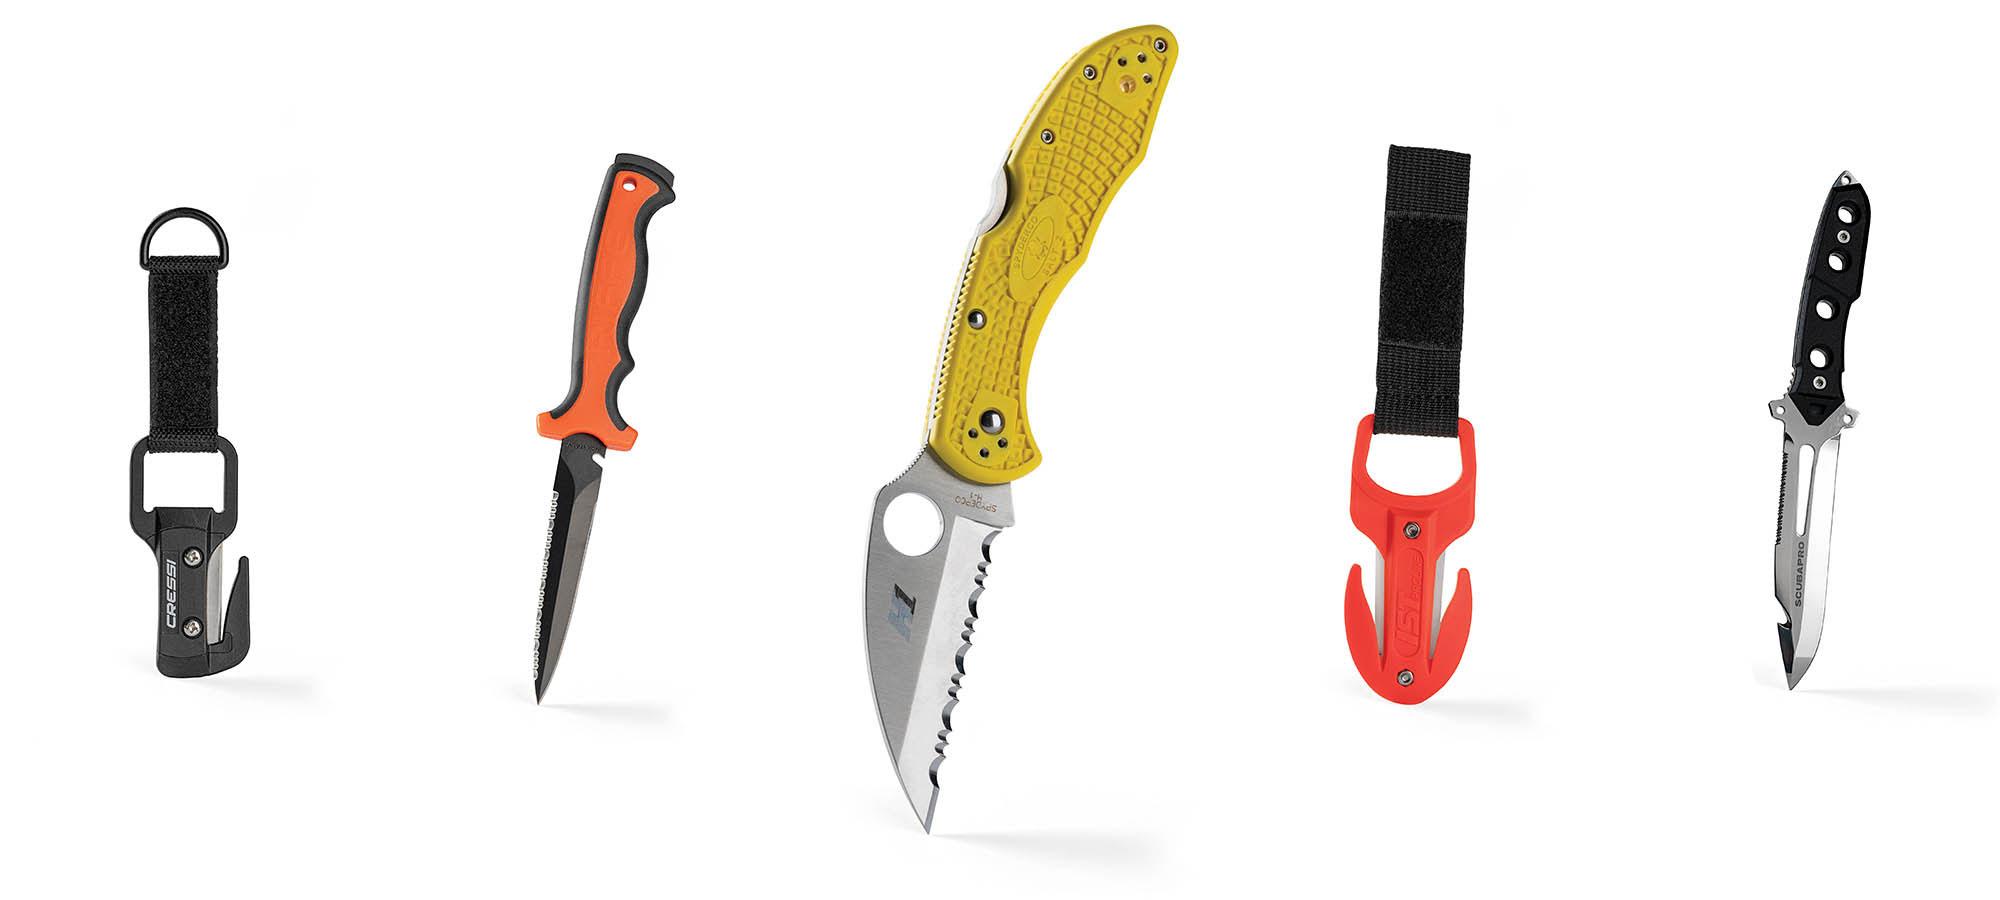 15 Brand-New Dive Knives Tested By ScubaLab